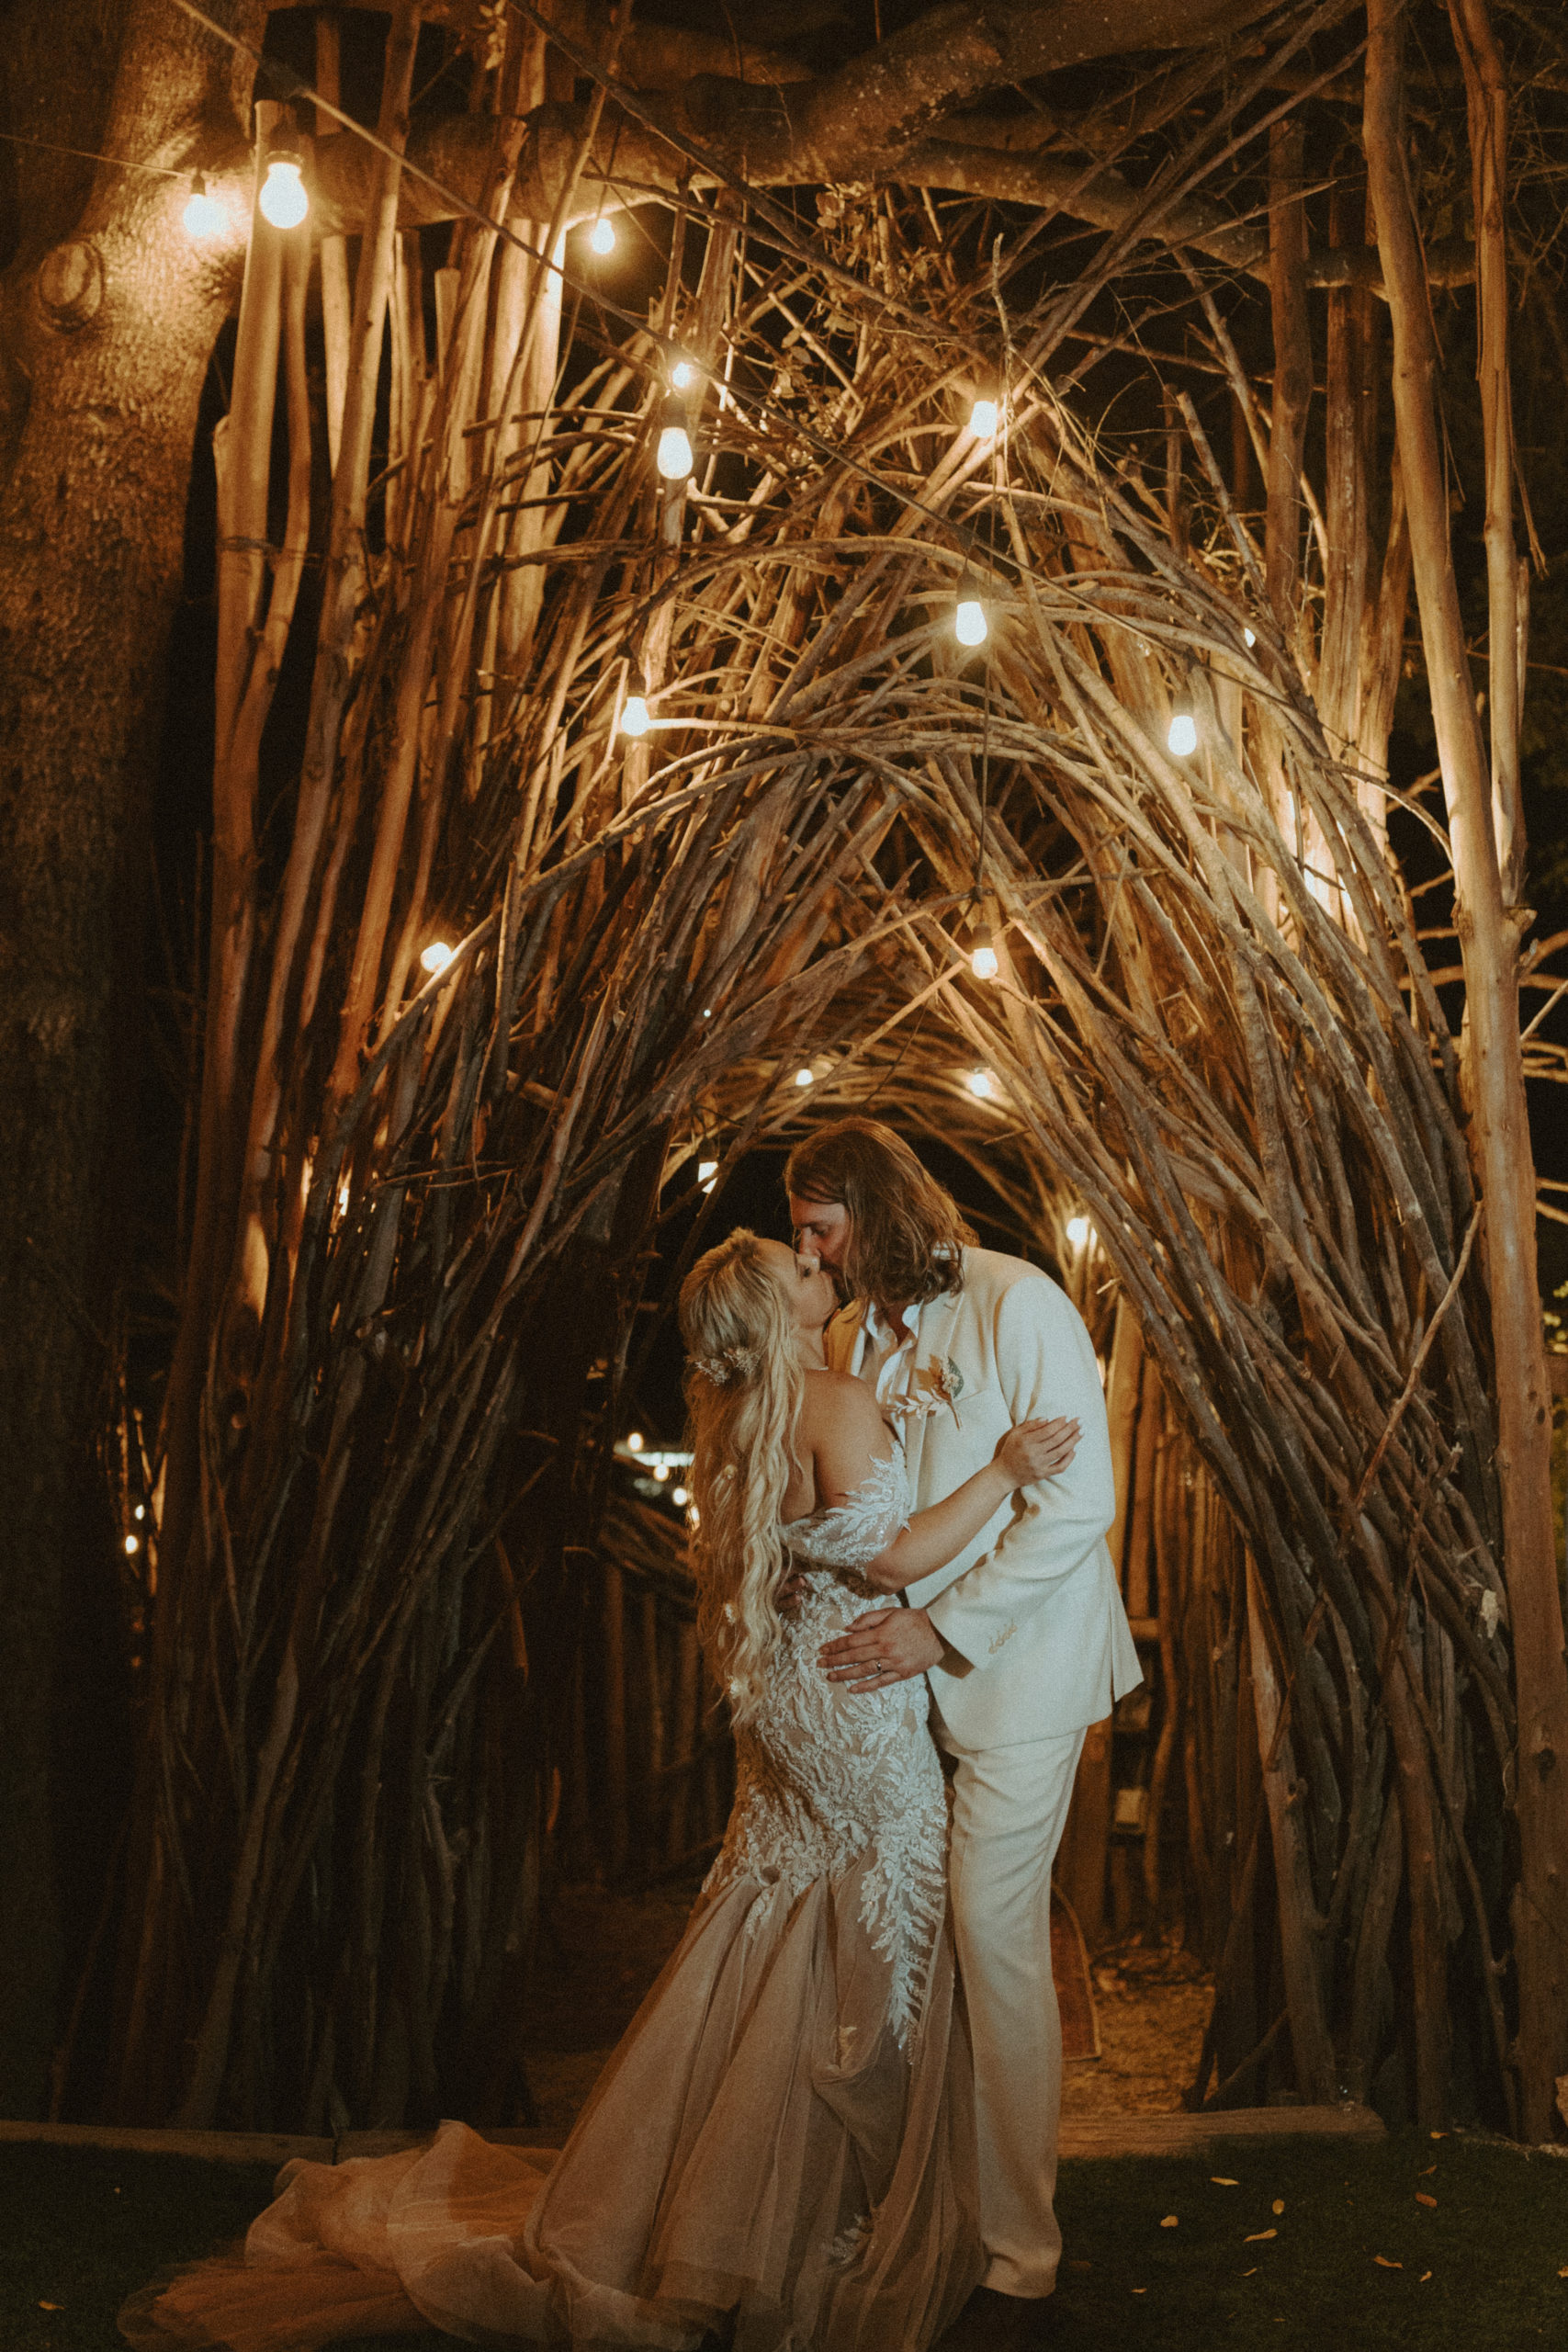 the couple kissing underneath the fairy lights